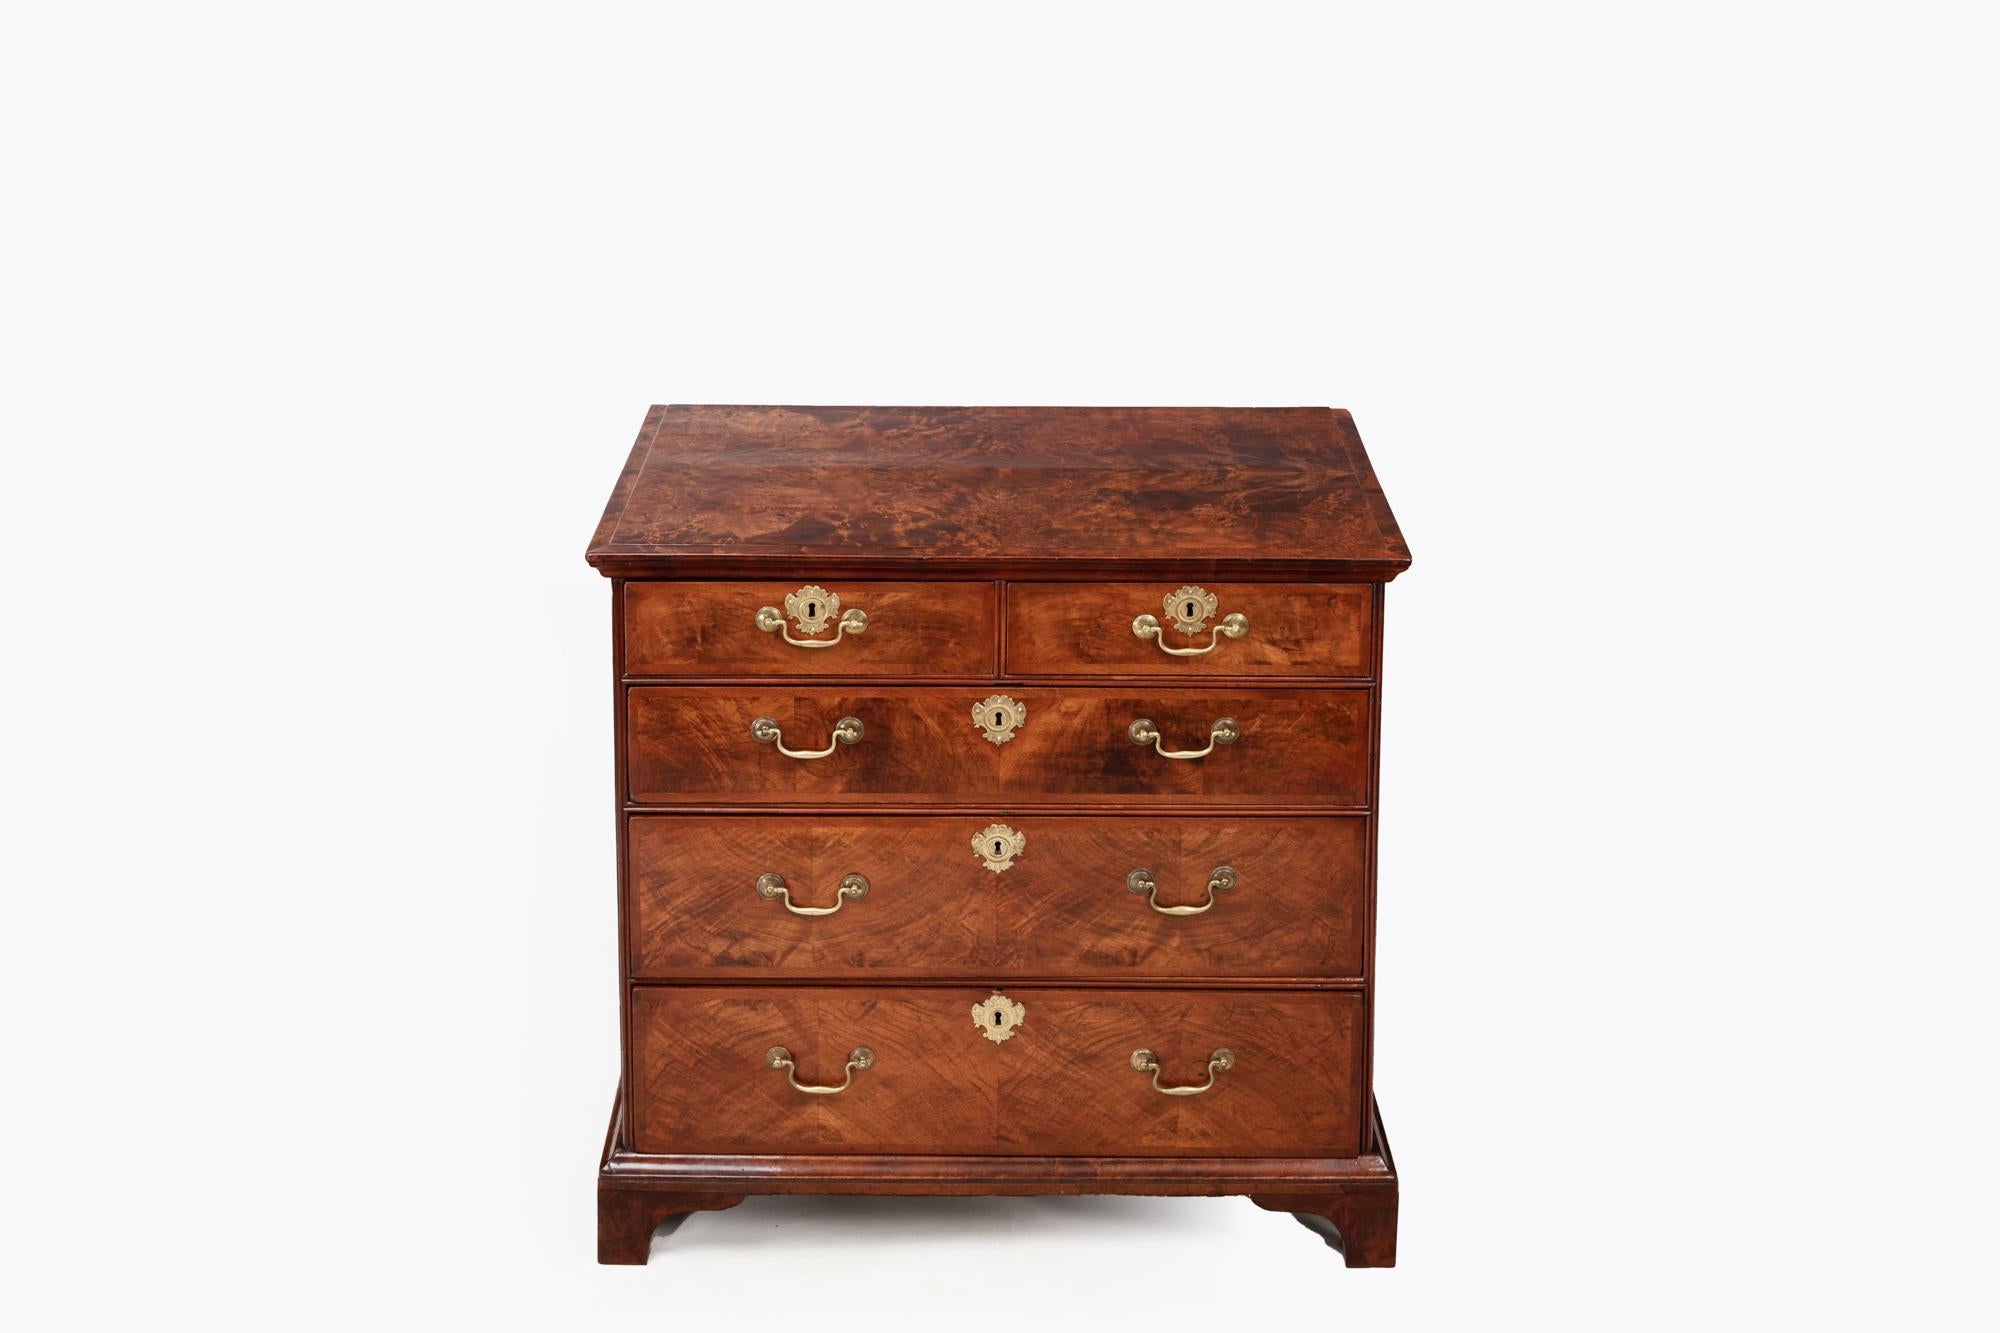 18th Century Georgian Burr Walnut Chest of Drawers with original ornate brass escutcheons, and swan neck handles. Featuring five drawers and simple ogee bracket feet. 